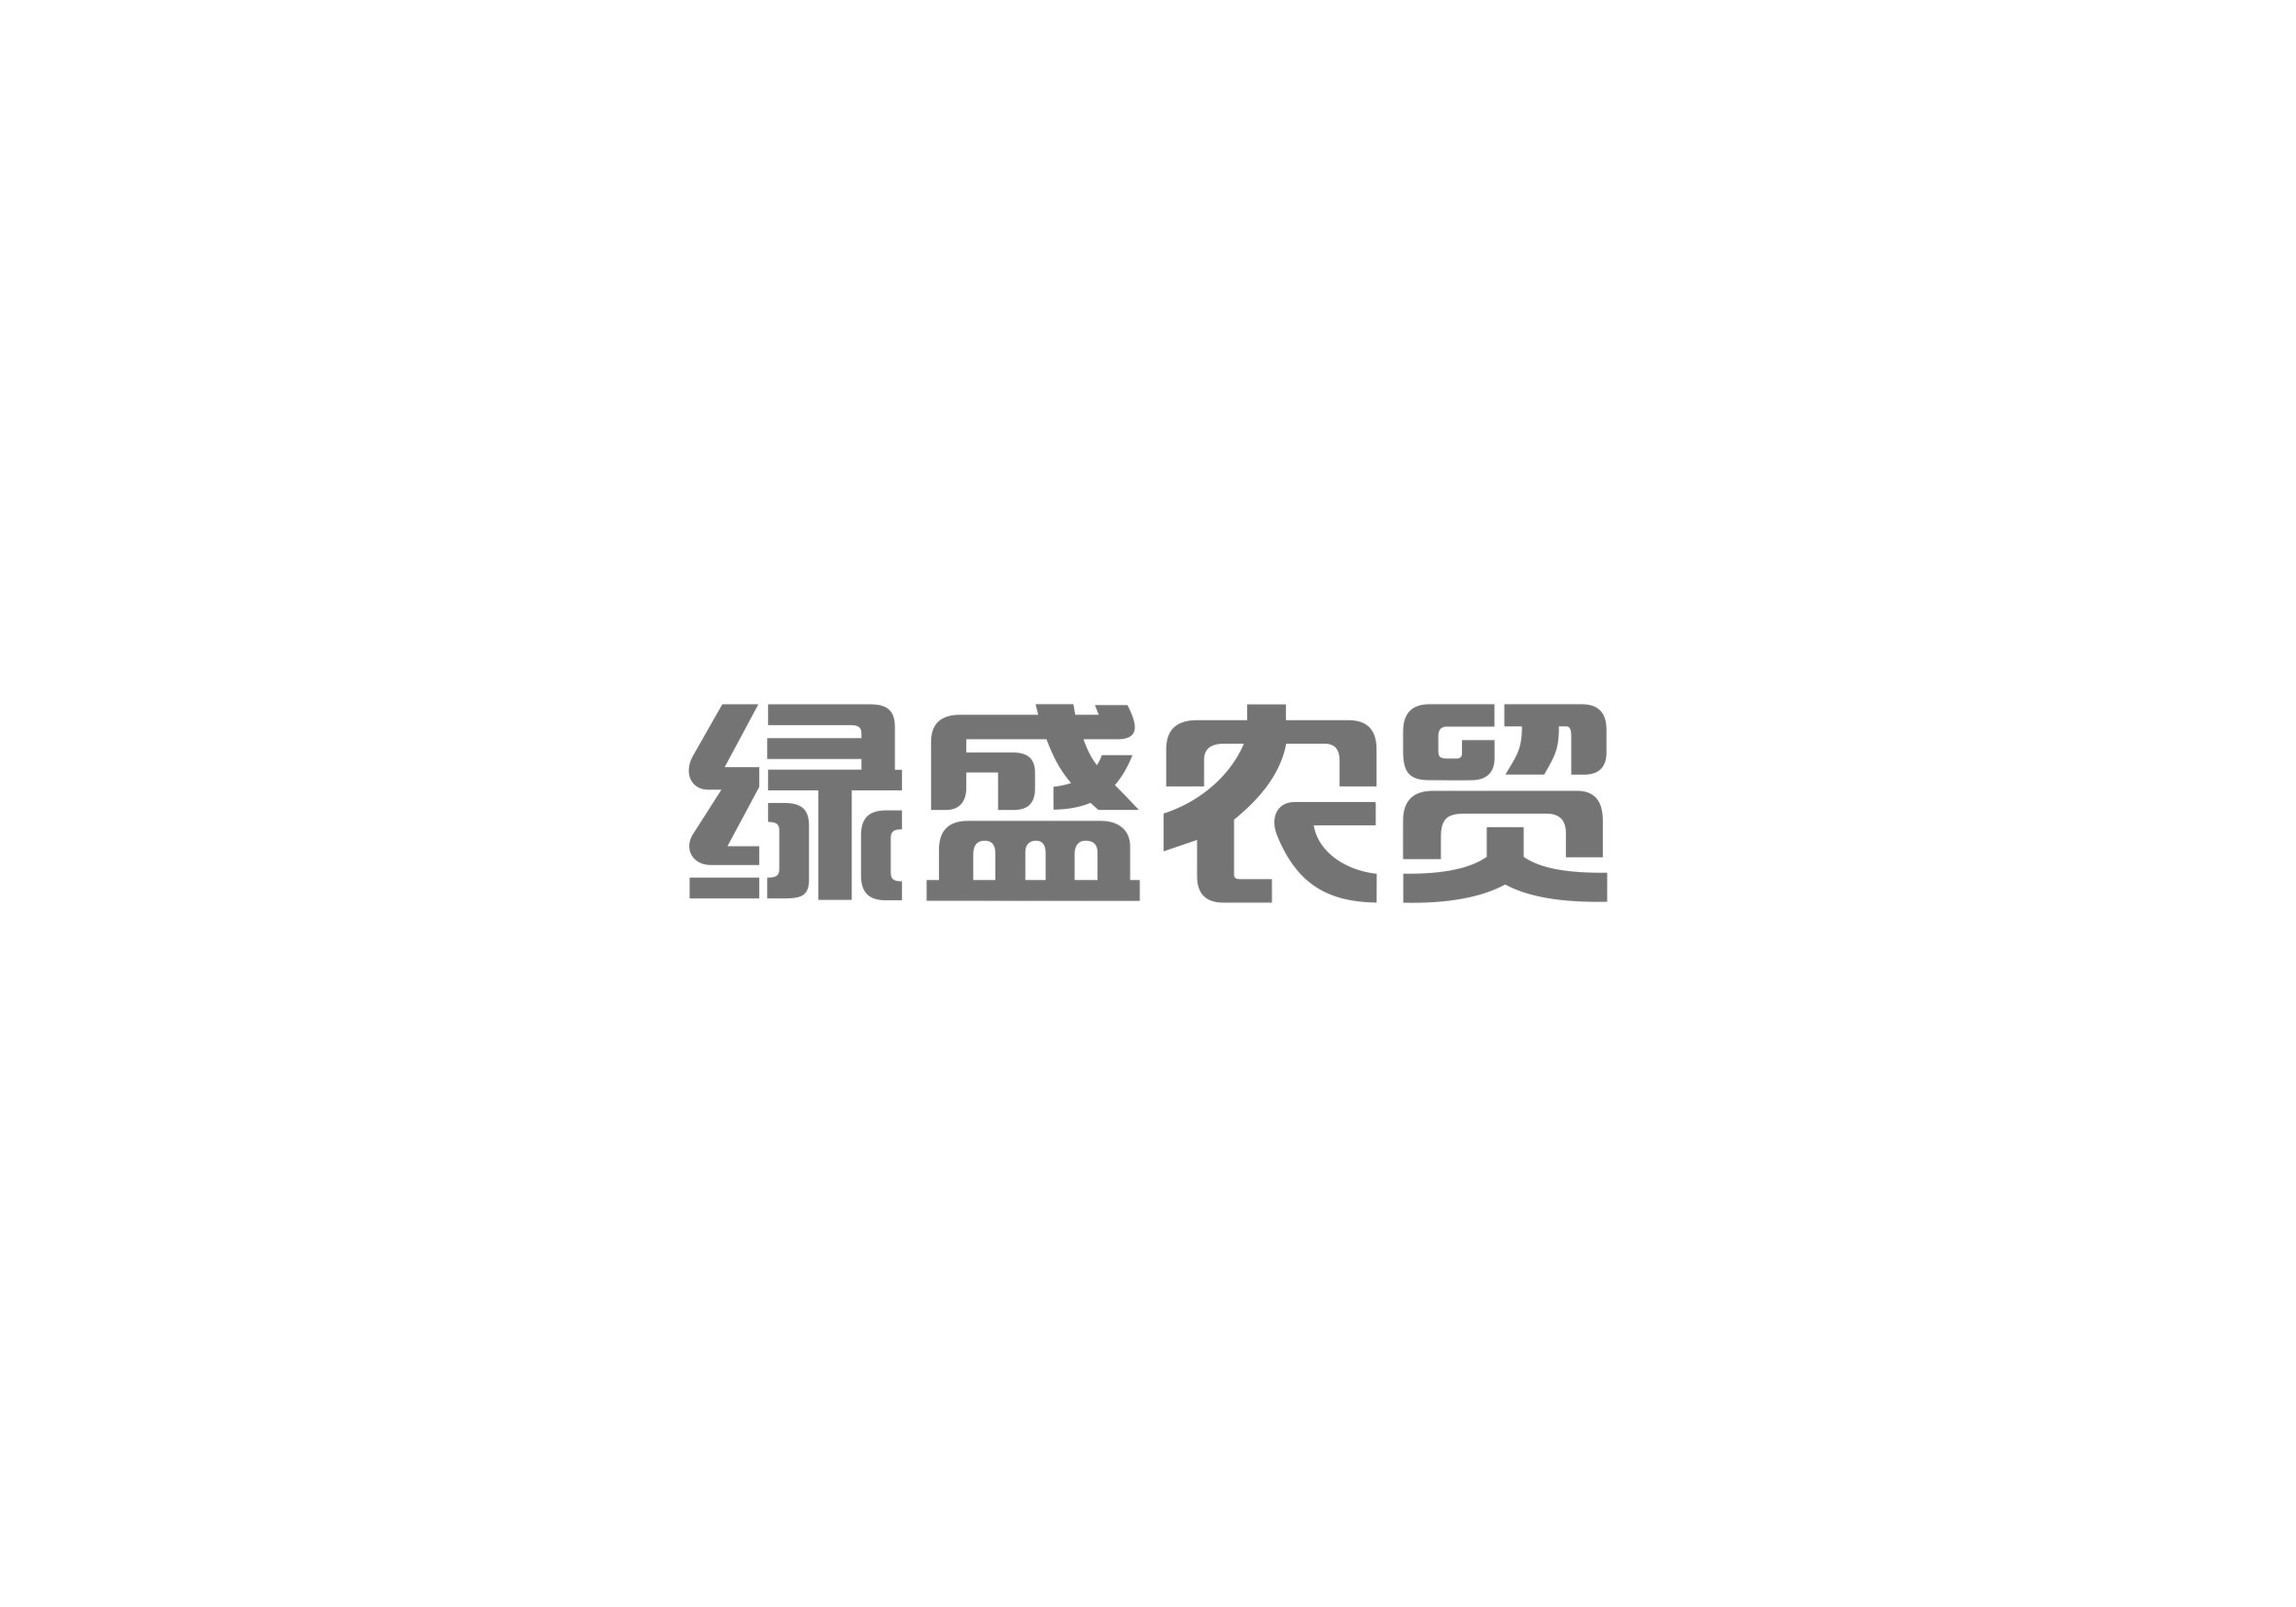 26P Chinese font design collection inspiration #.191